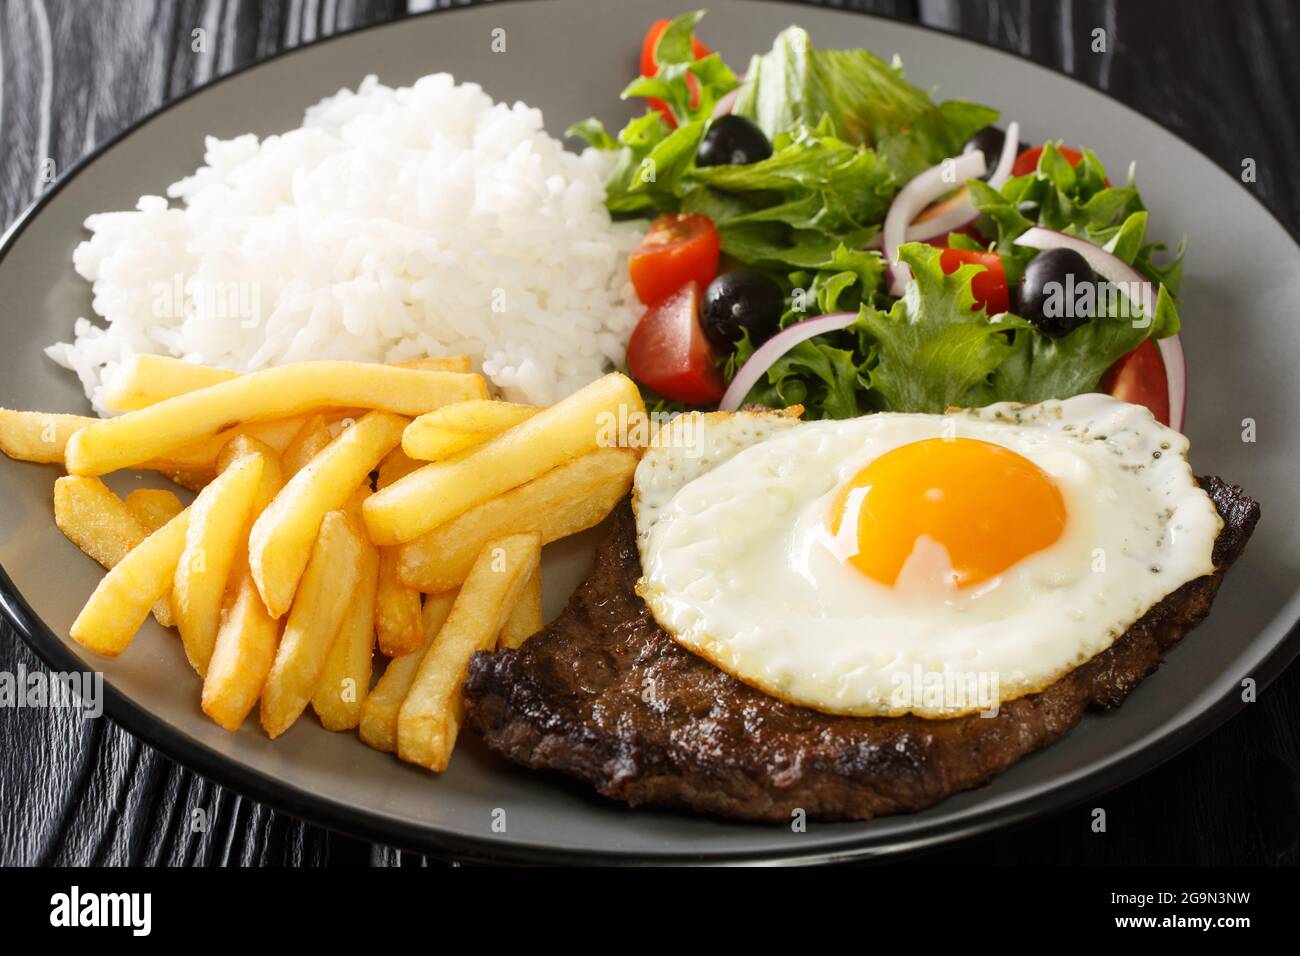 Beef Steak with Egg, french fries, rice and salad closeup in the plate on the table. Horizontal Stock Photo